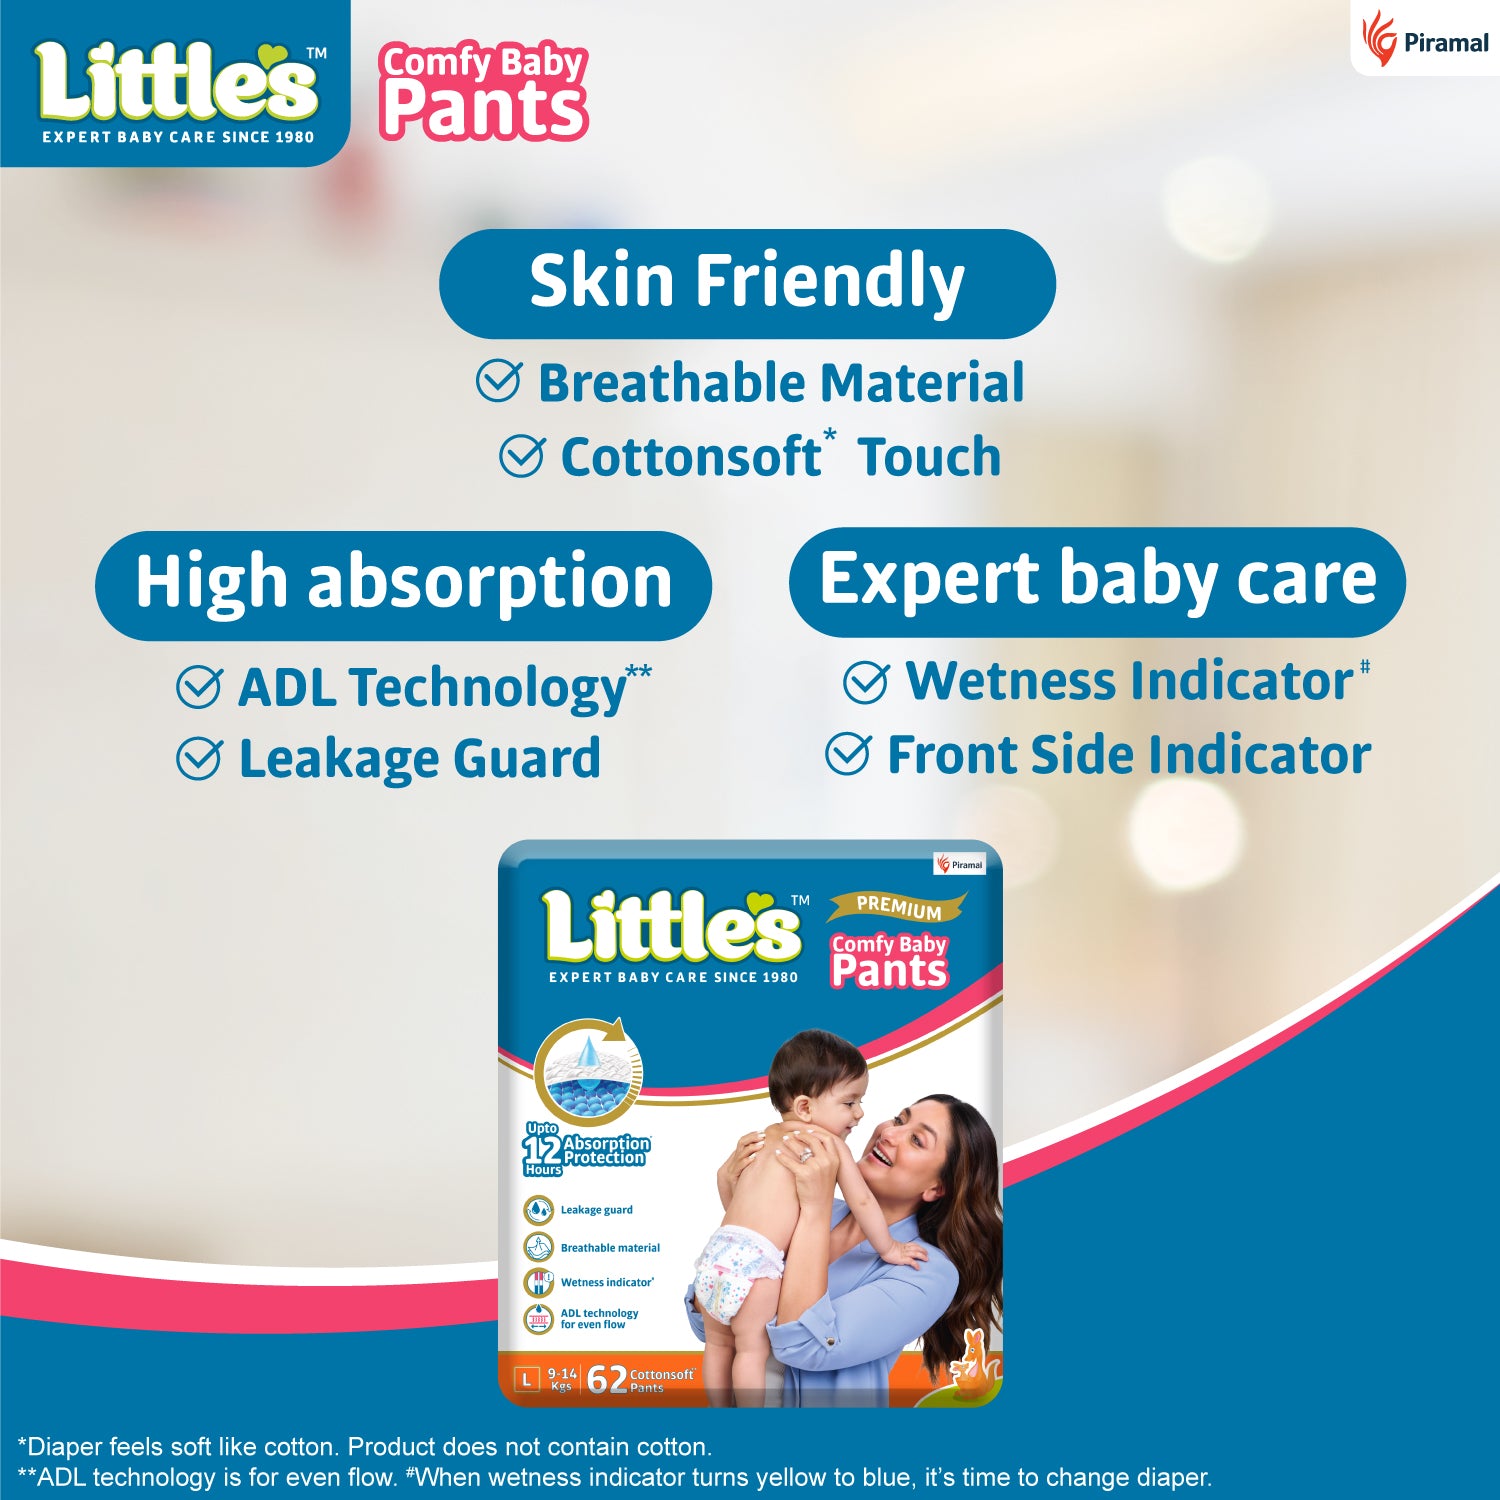 Little's Saver Combo ( Little's Comfy Baby Pants | Superjumbo Pack of 1, Little's Soft Cleansing Baby Wipes Lid Pack of 1 | Contains Aloe Vera & Jojoba Oil -80 Wipes)